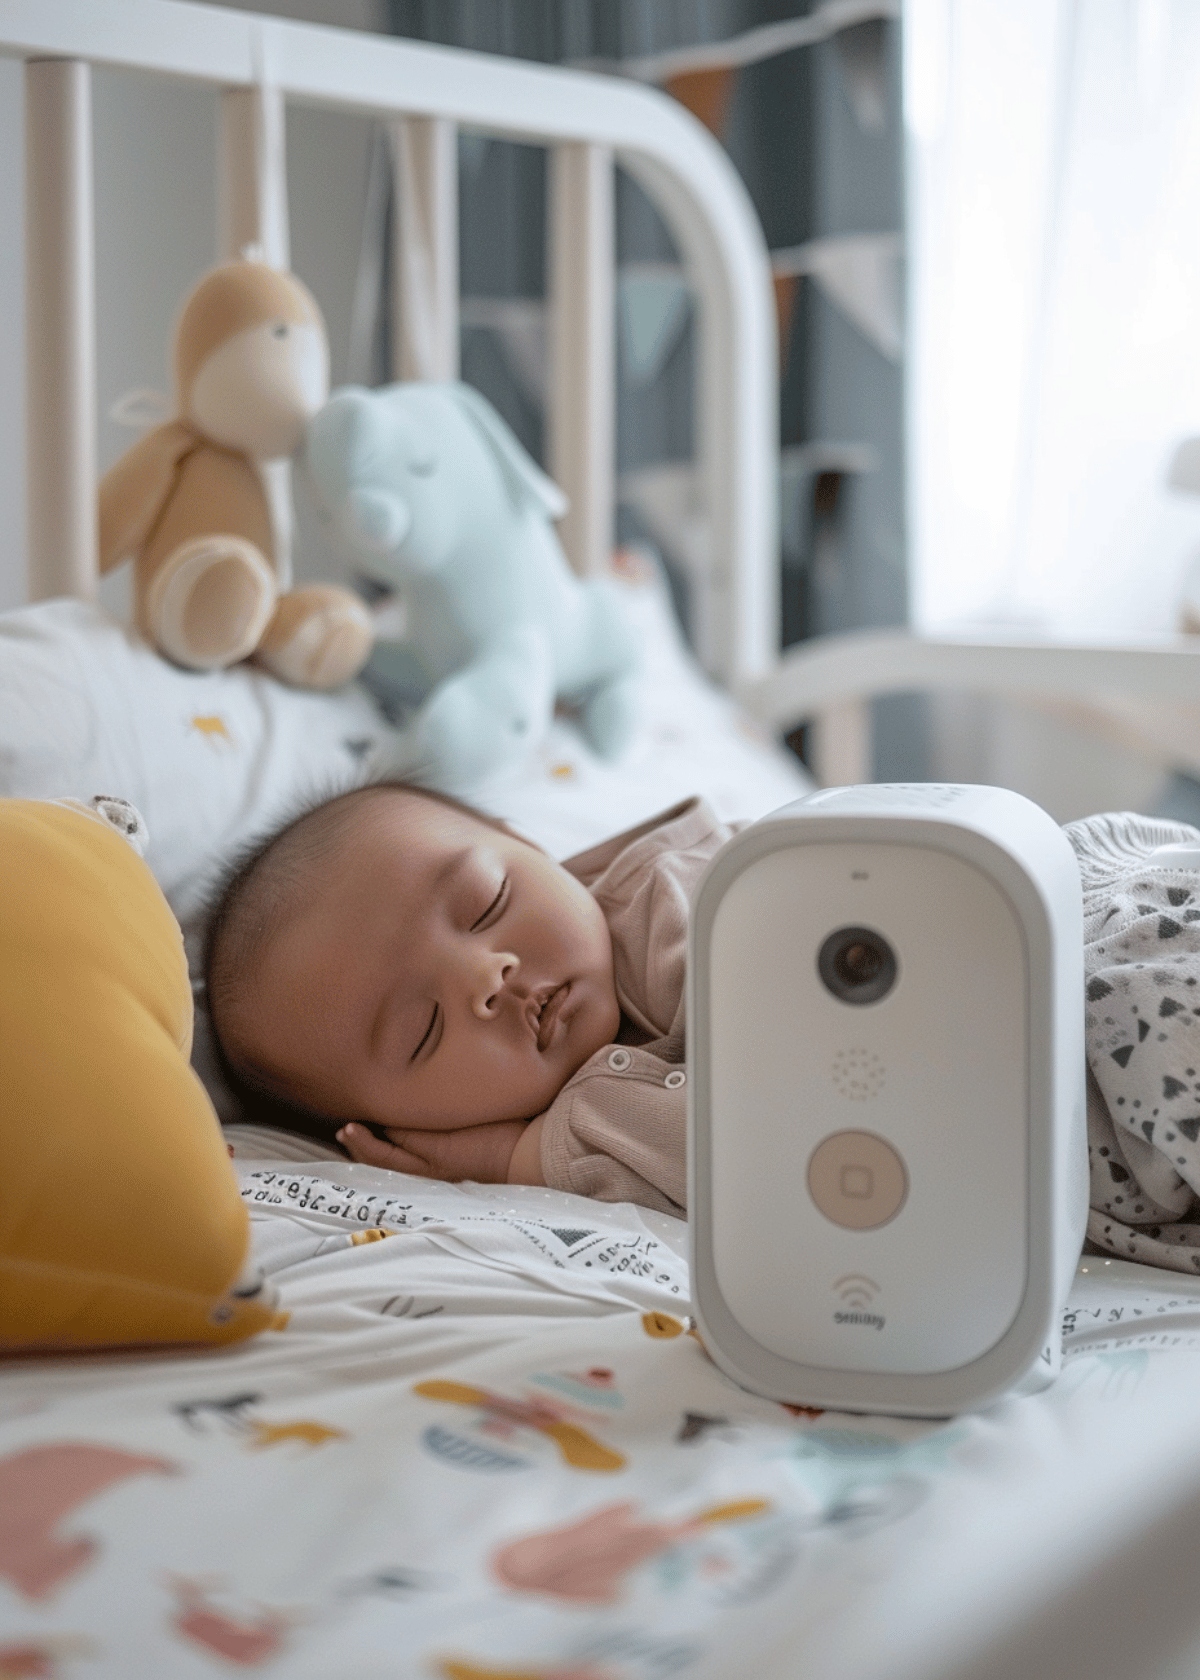 If You're a Parent You Need One of The Best Infant Monitors to Ensure Your Newborn's Safety! 👶